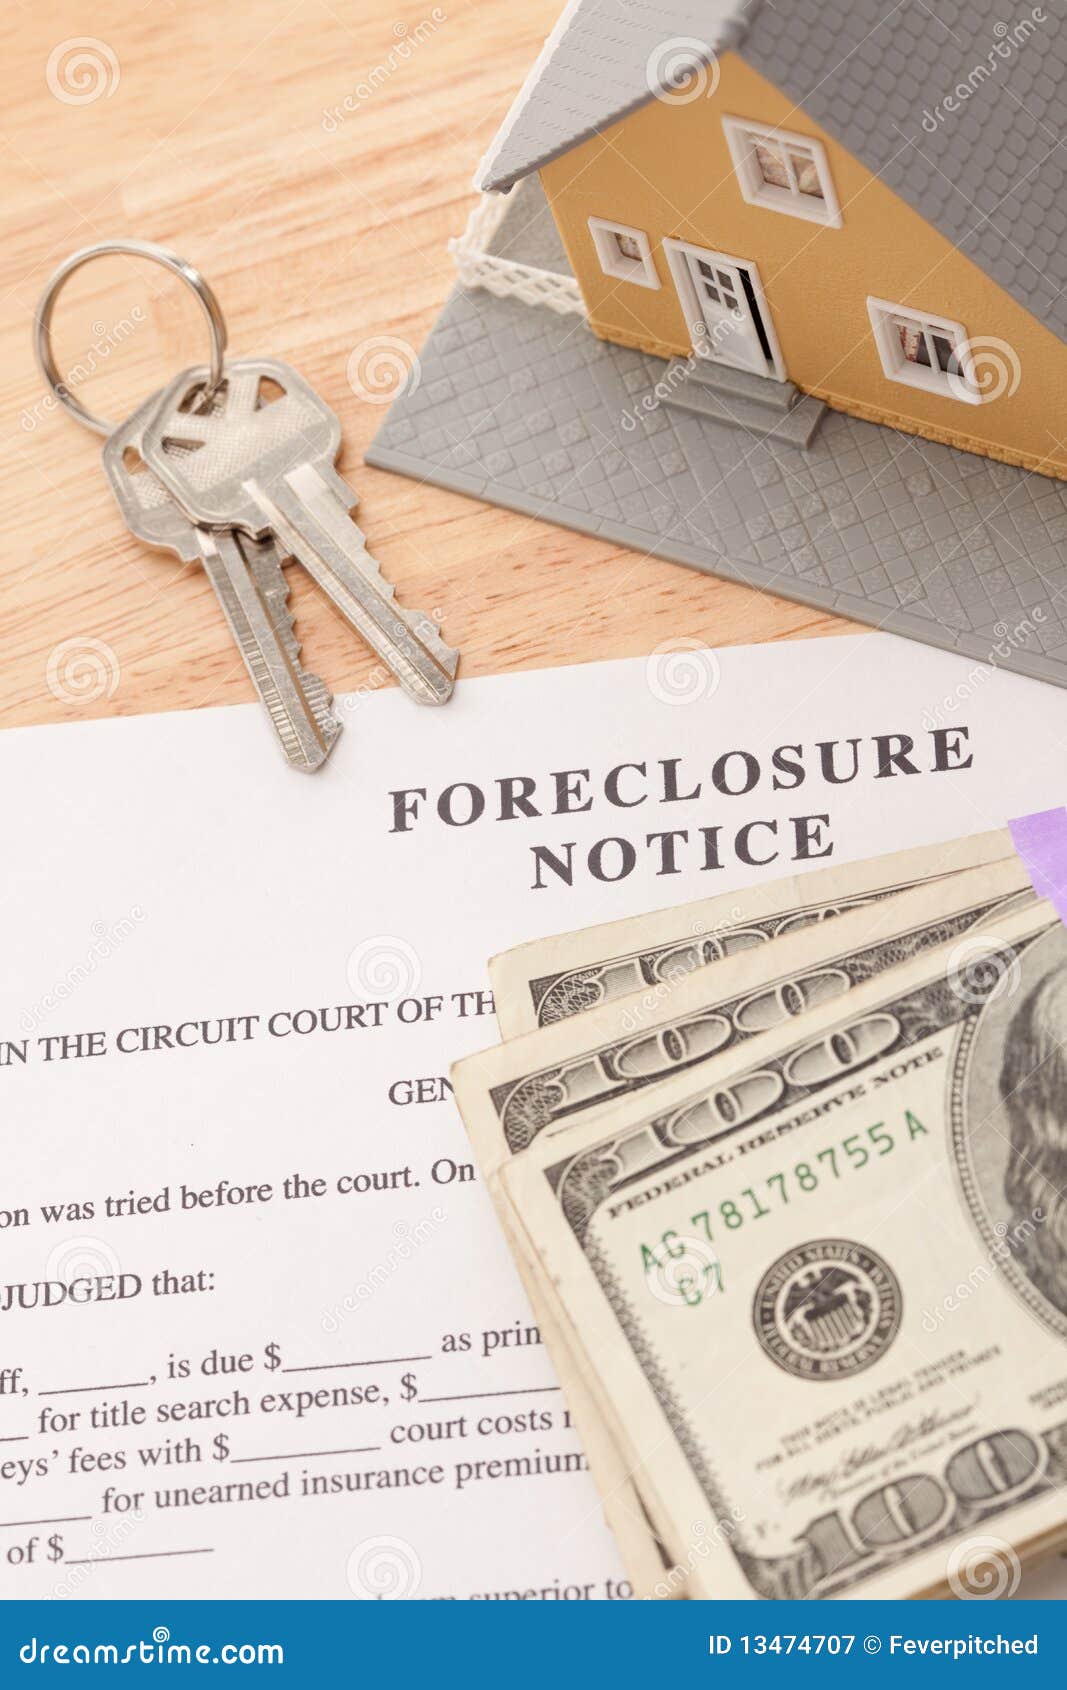 foreclosure notice, home, house keys and money